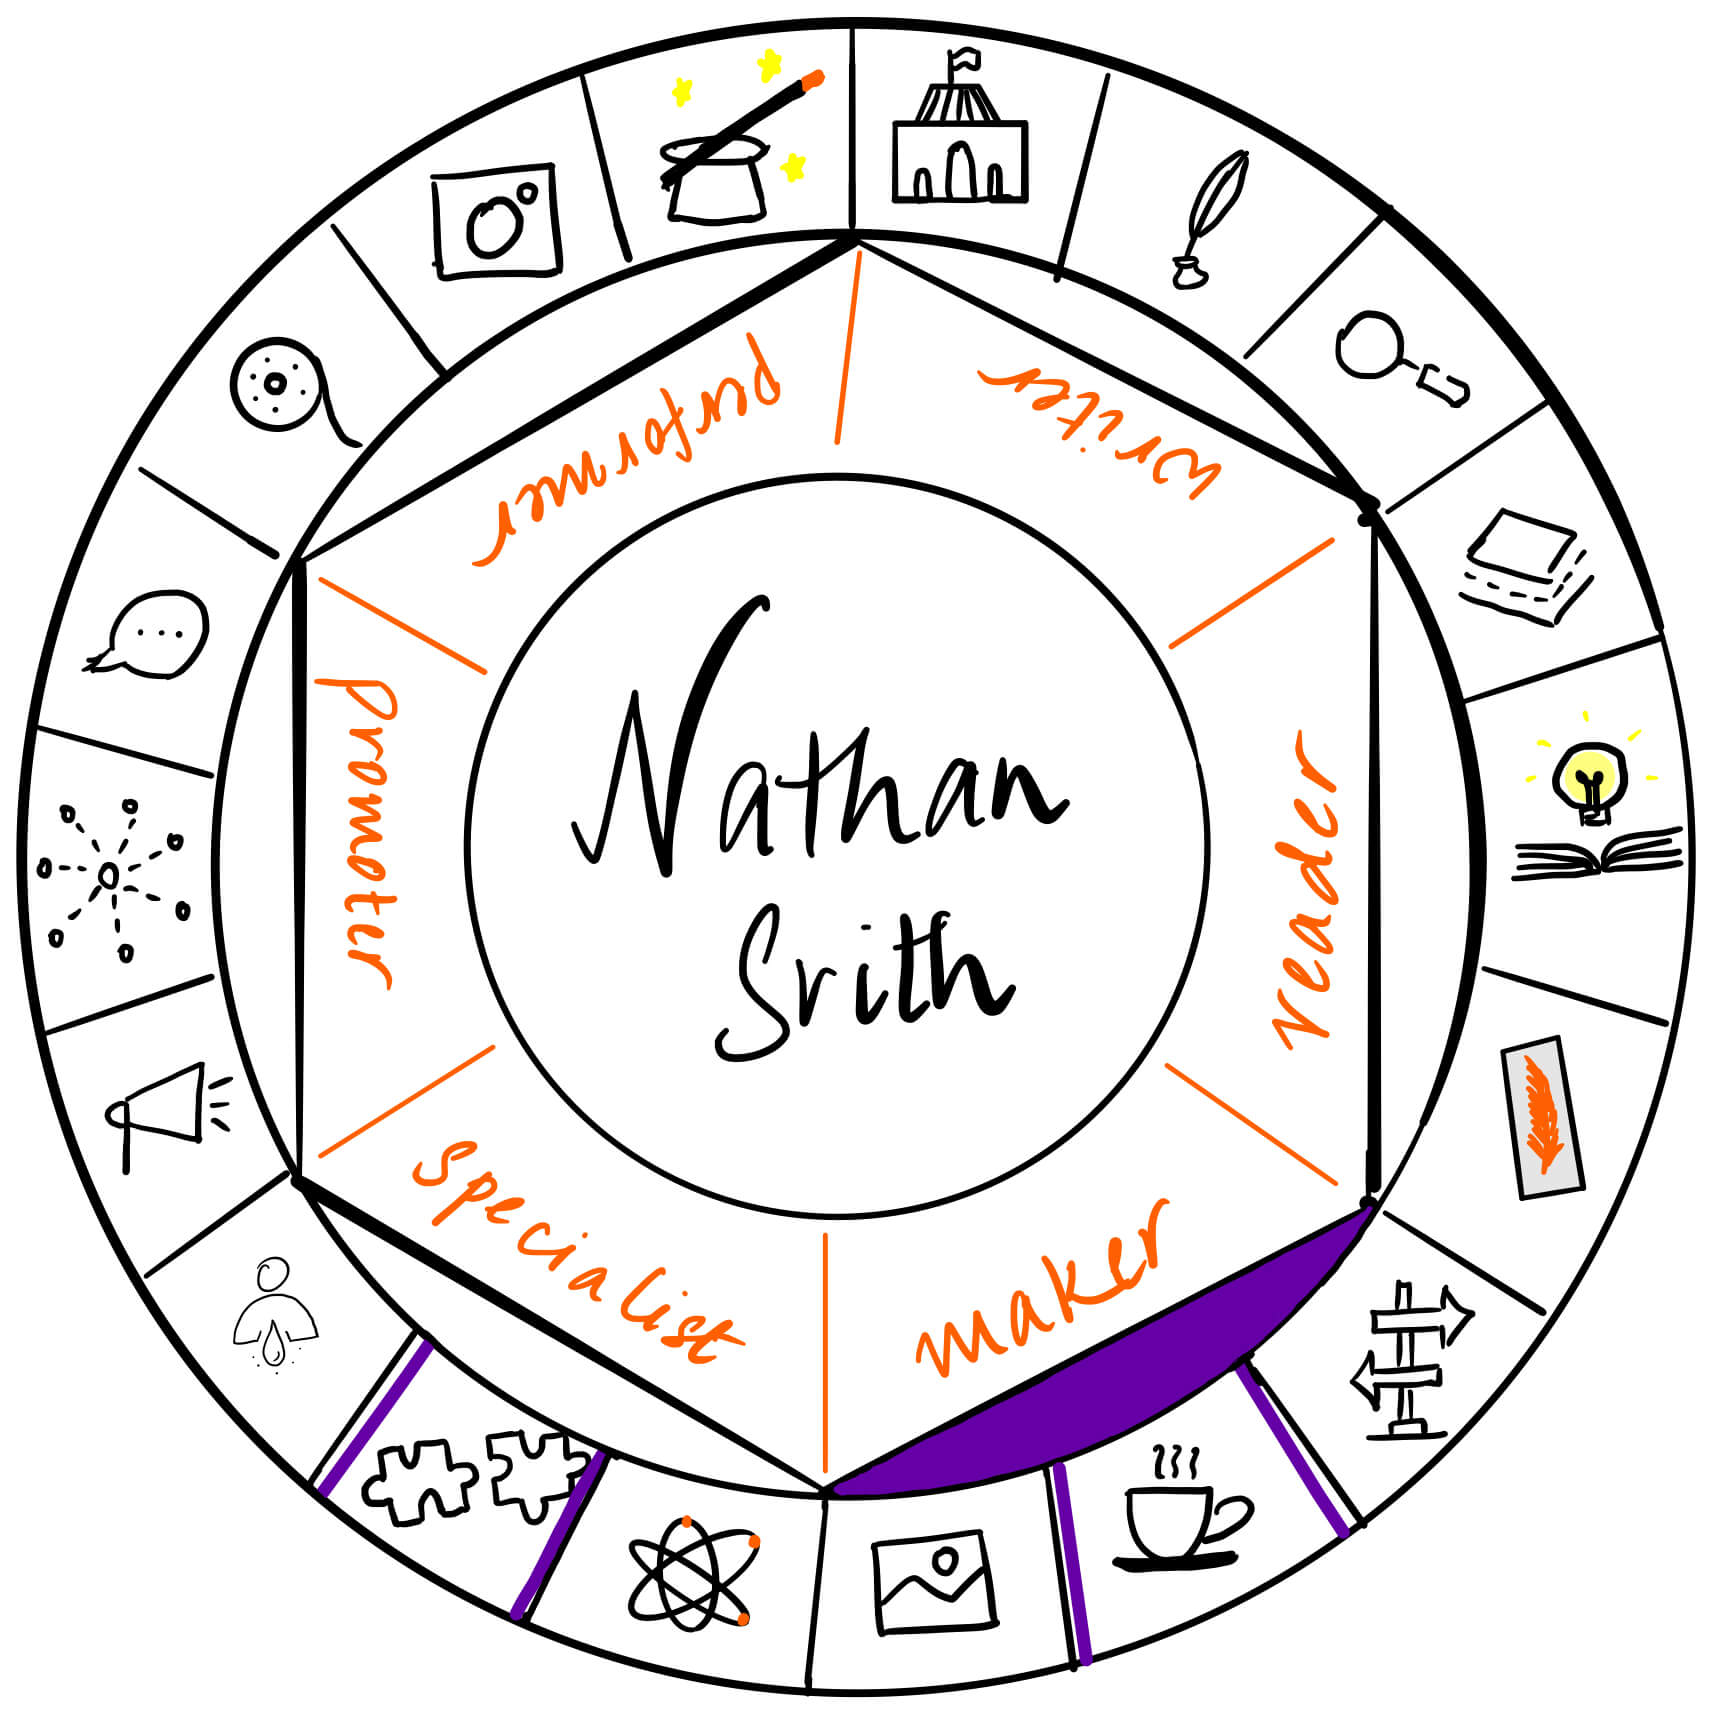 Nathan Srith is a maker. It's a pleasure to have him over on The Creator's Roulette for a guest post about dystopian fiction.